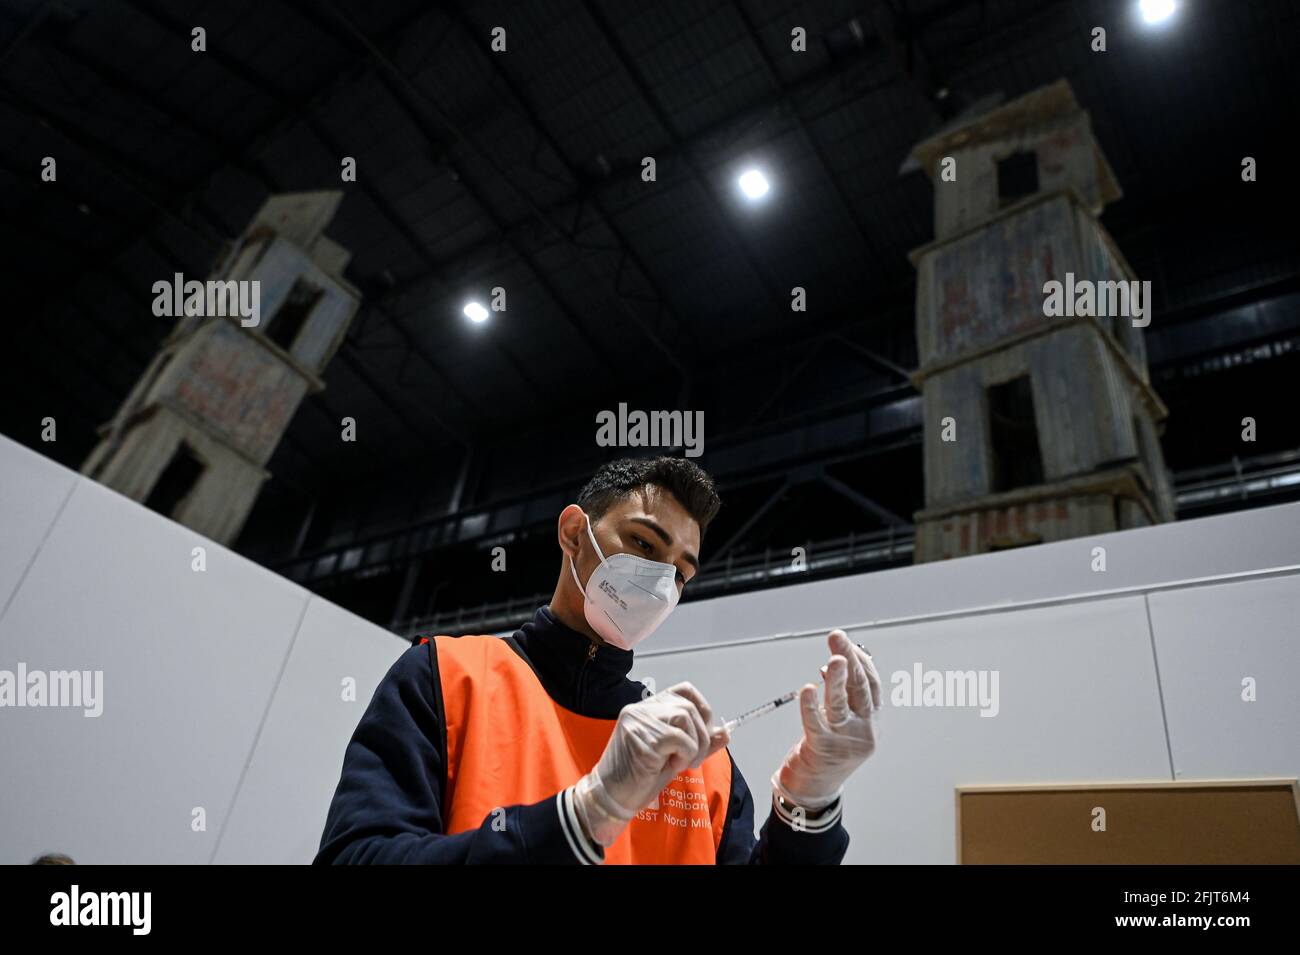 Milan, Italy. 26th April, 2021. A man prepares a syringe with Astrazeneca vaccine at the mass covid-19 vaccination hub coordinated by ASST Nord Milano opening today at “Pirelli HangarBicocca” where the monumental site-specific art installation ‘The Seven Heavenly Palaces 2004-2015' by artist Anselm Kiefer is on display. Credit: Piero Cruciatti/Alamy Live News Stock Photo